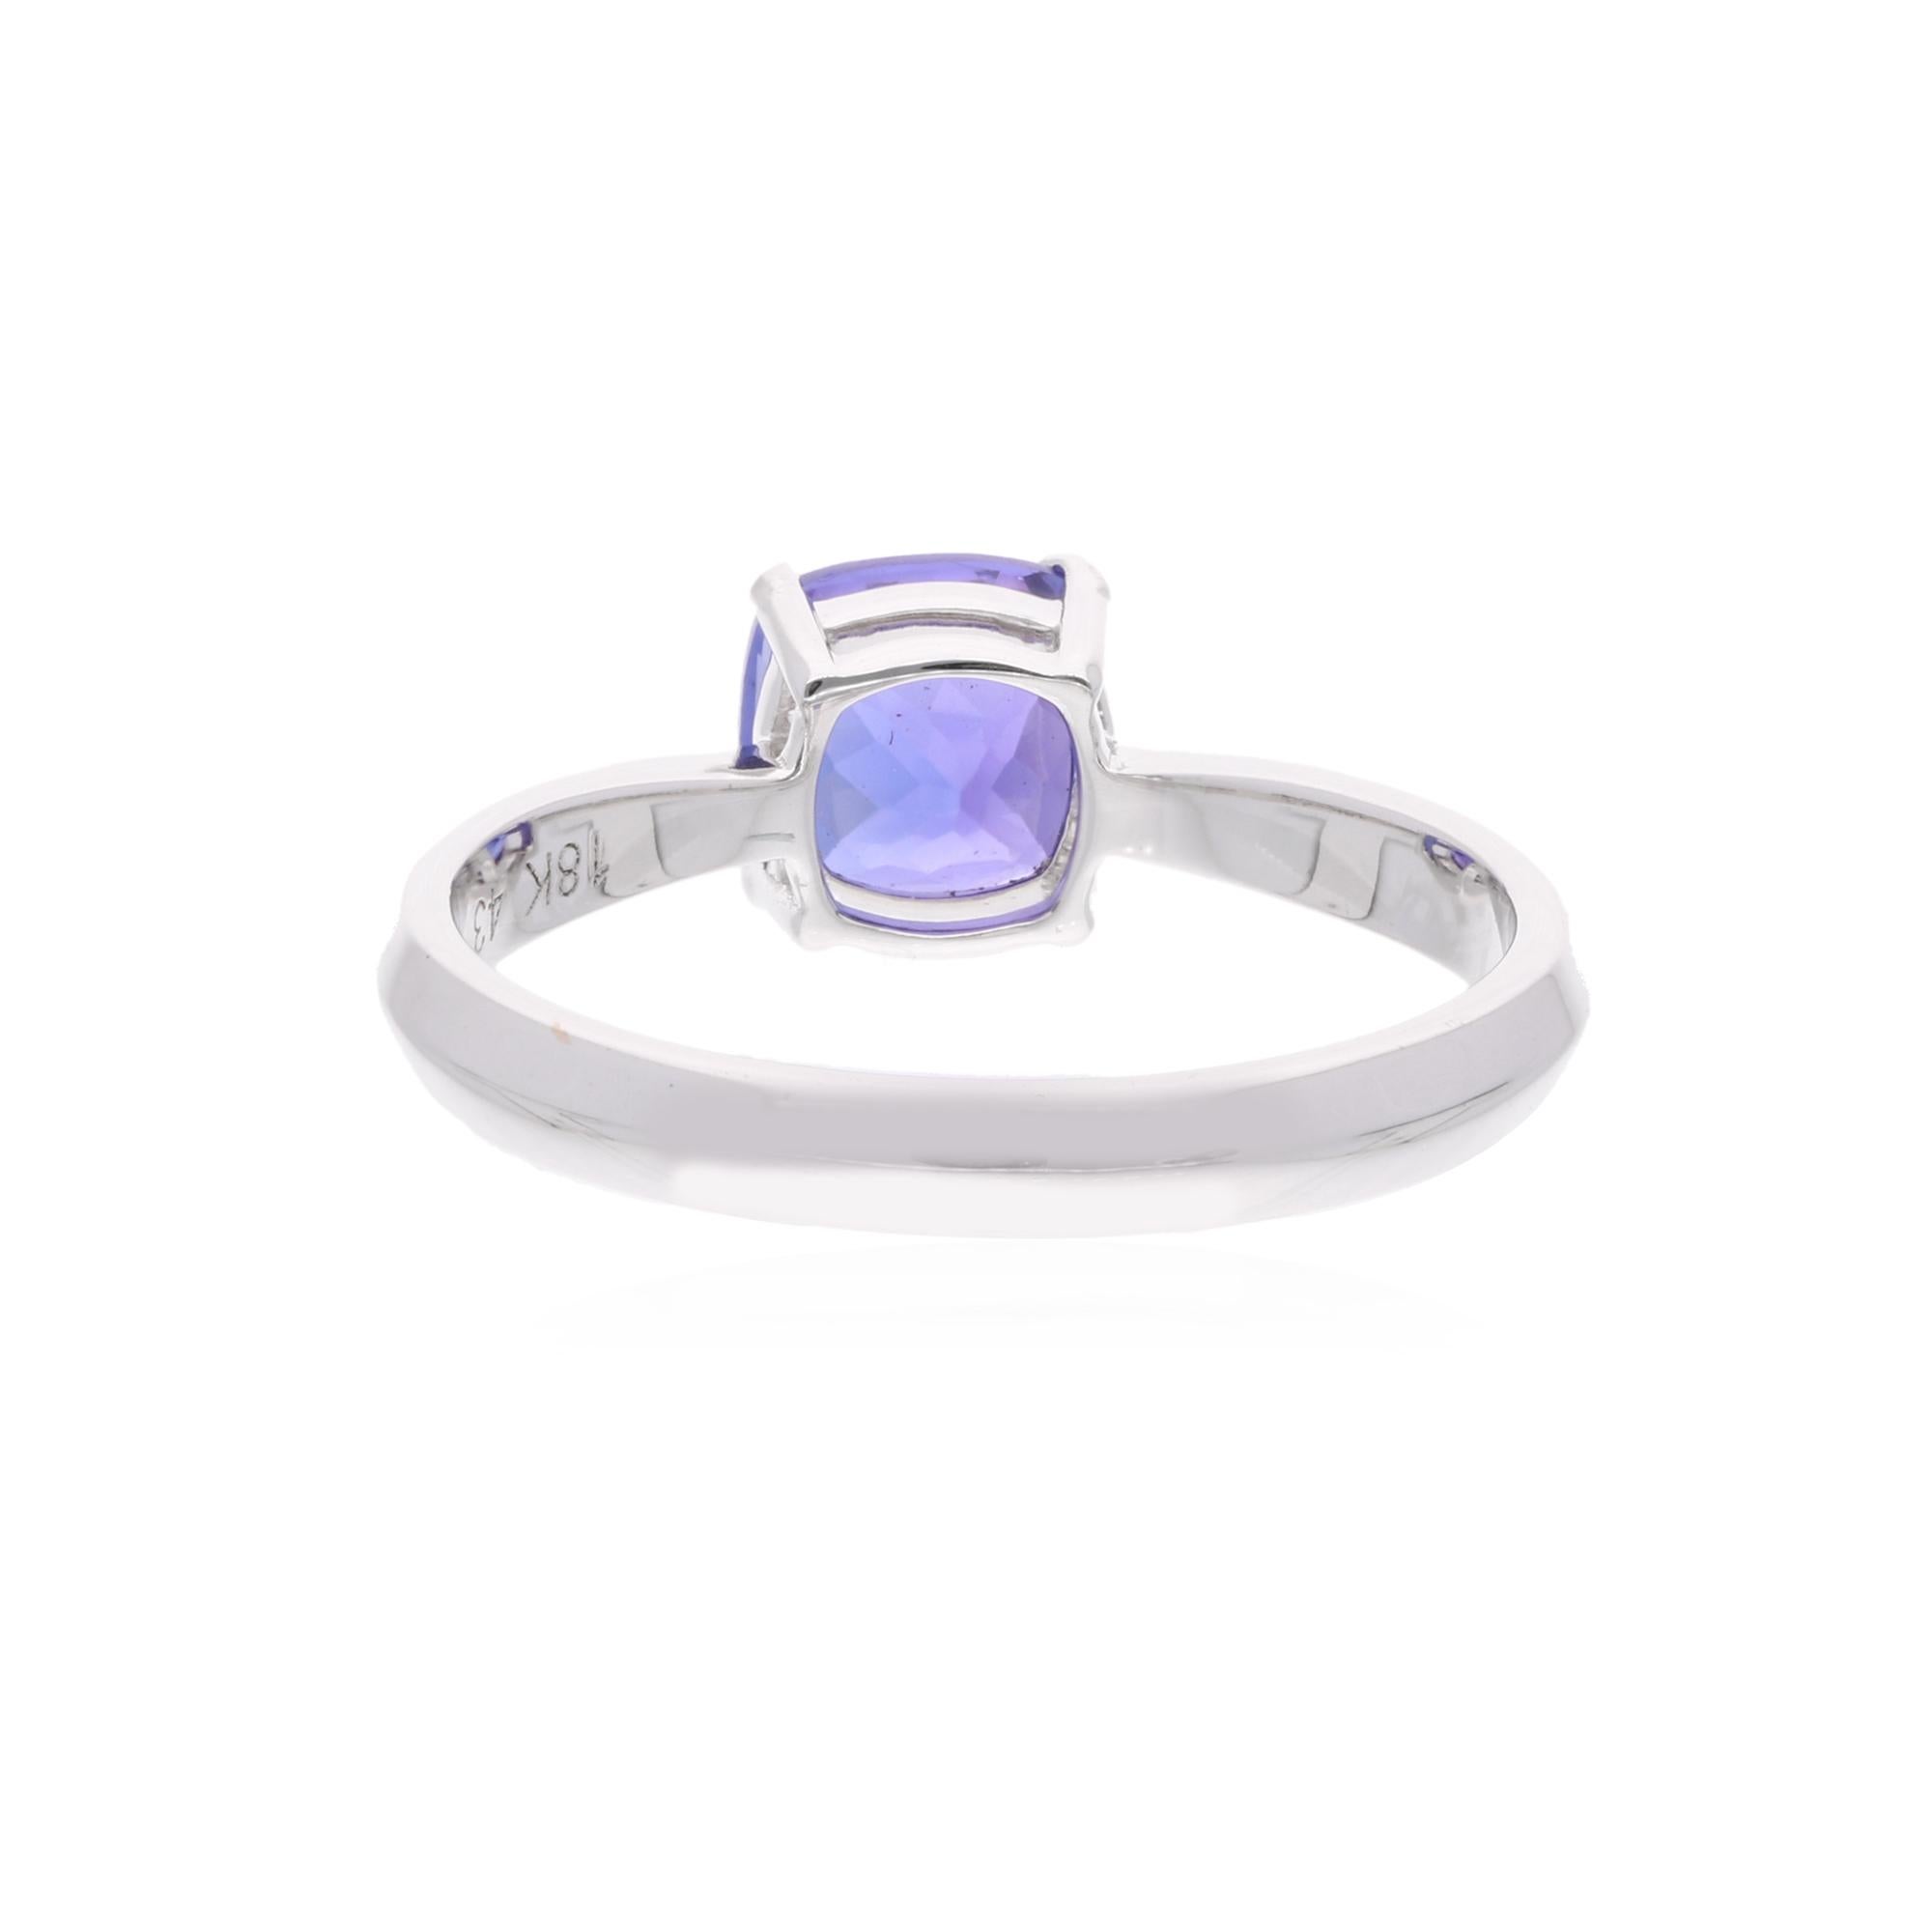 Women's 1.67 Carat Solitaire Cushion Tanzanite Ring 18 Solid Karat White Gold Jewelry For Sale